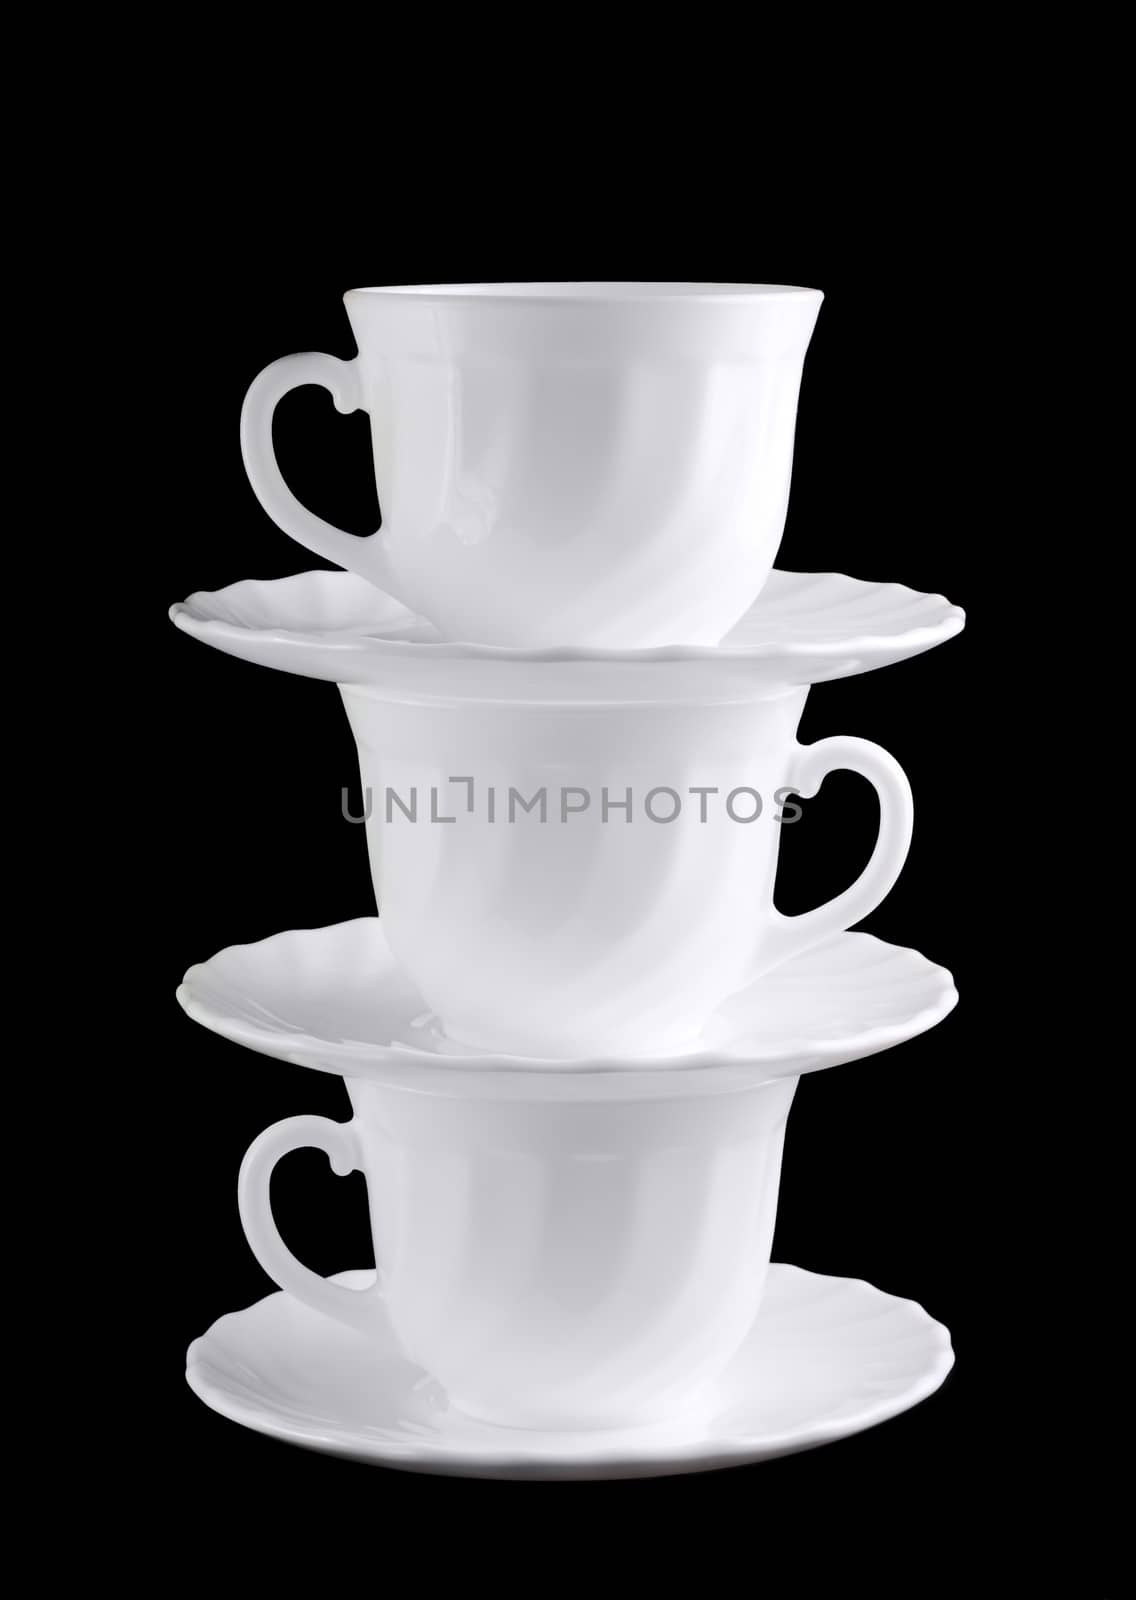 Pile of white shiny cups by dedmorozz